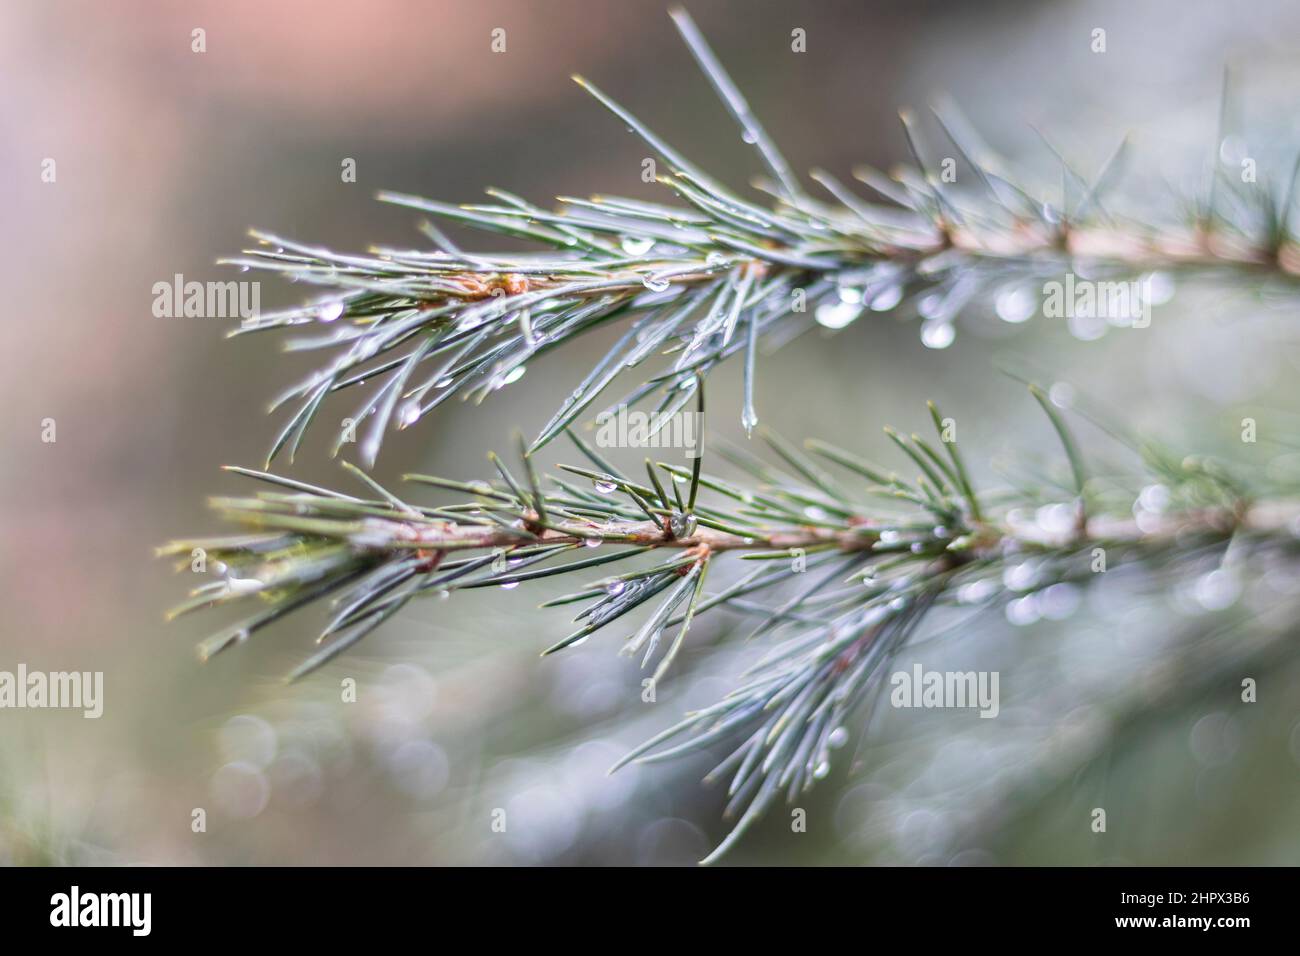 Himalayan tree in rain with selective focus on a tree branch Stock Photo